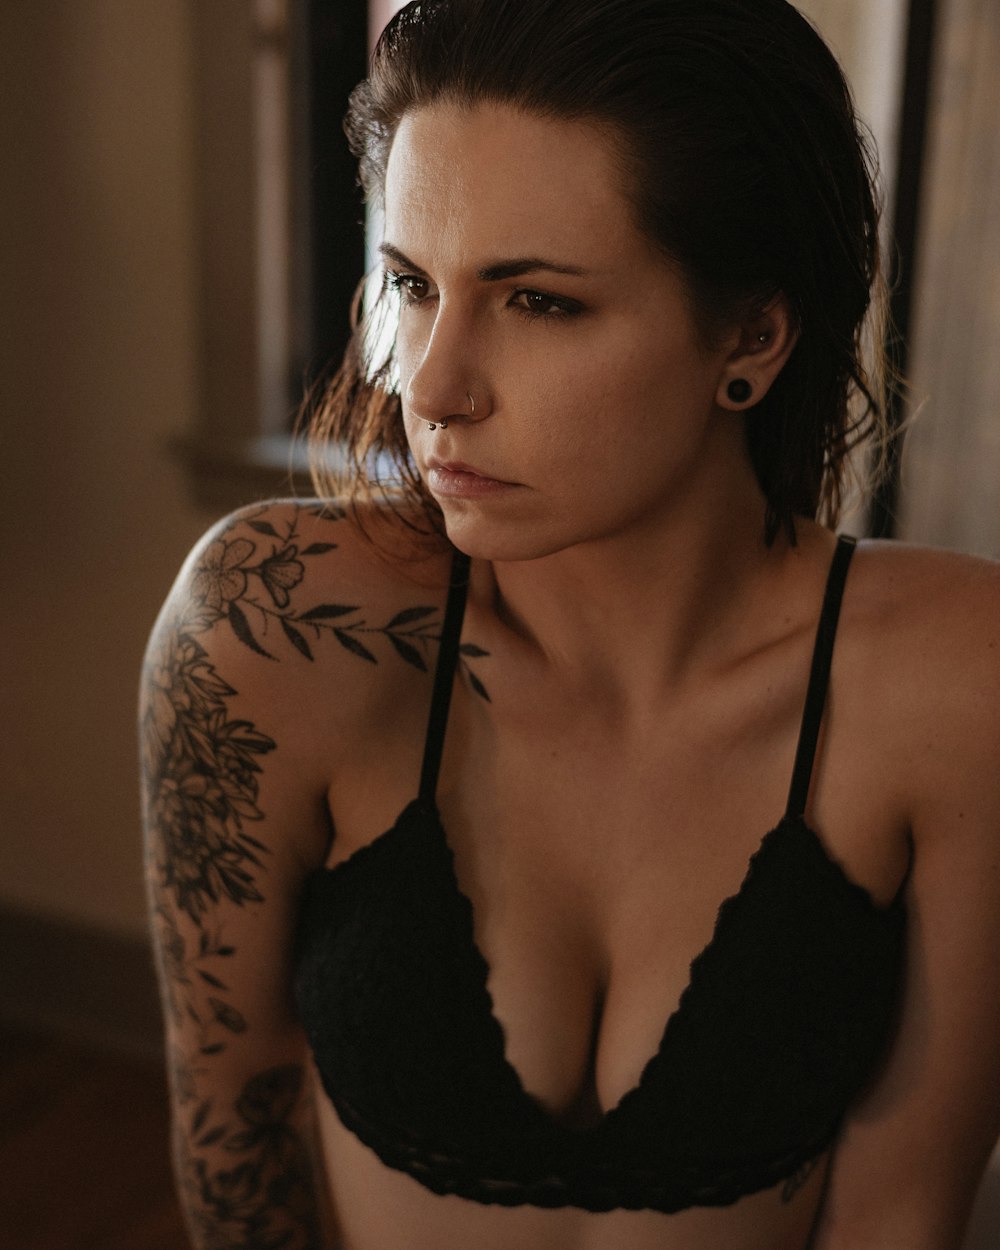 Woman in black brassiere with black floral tattoo on her back photo – Free  Usa Image on Unsplash